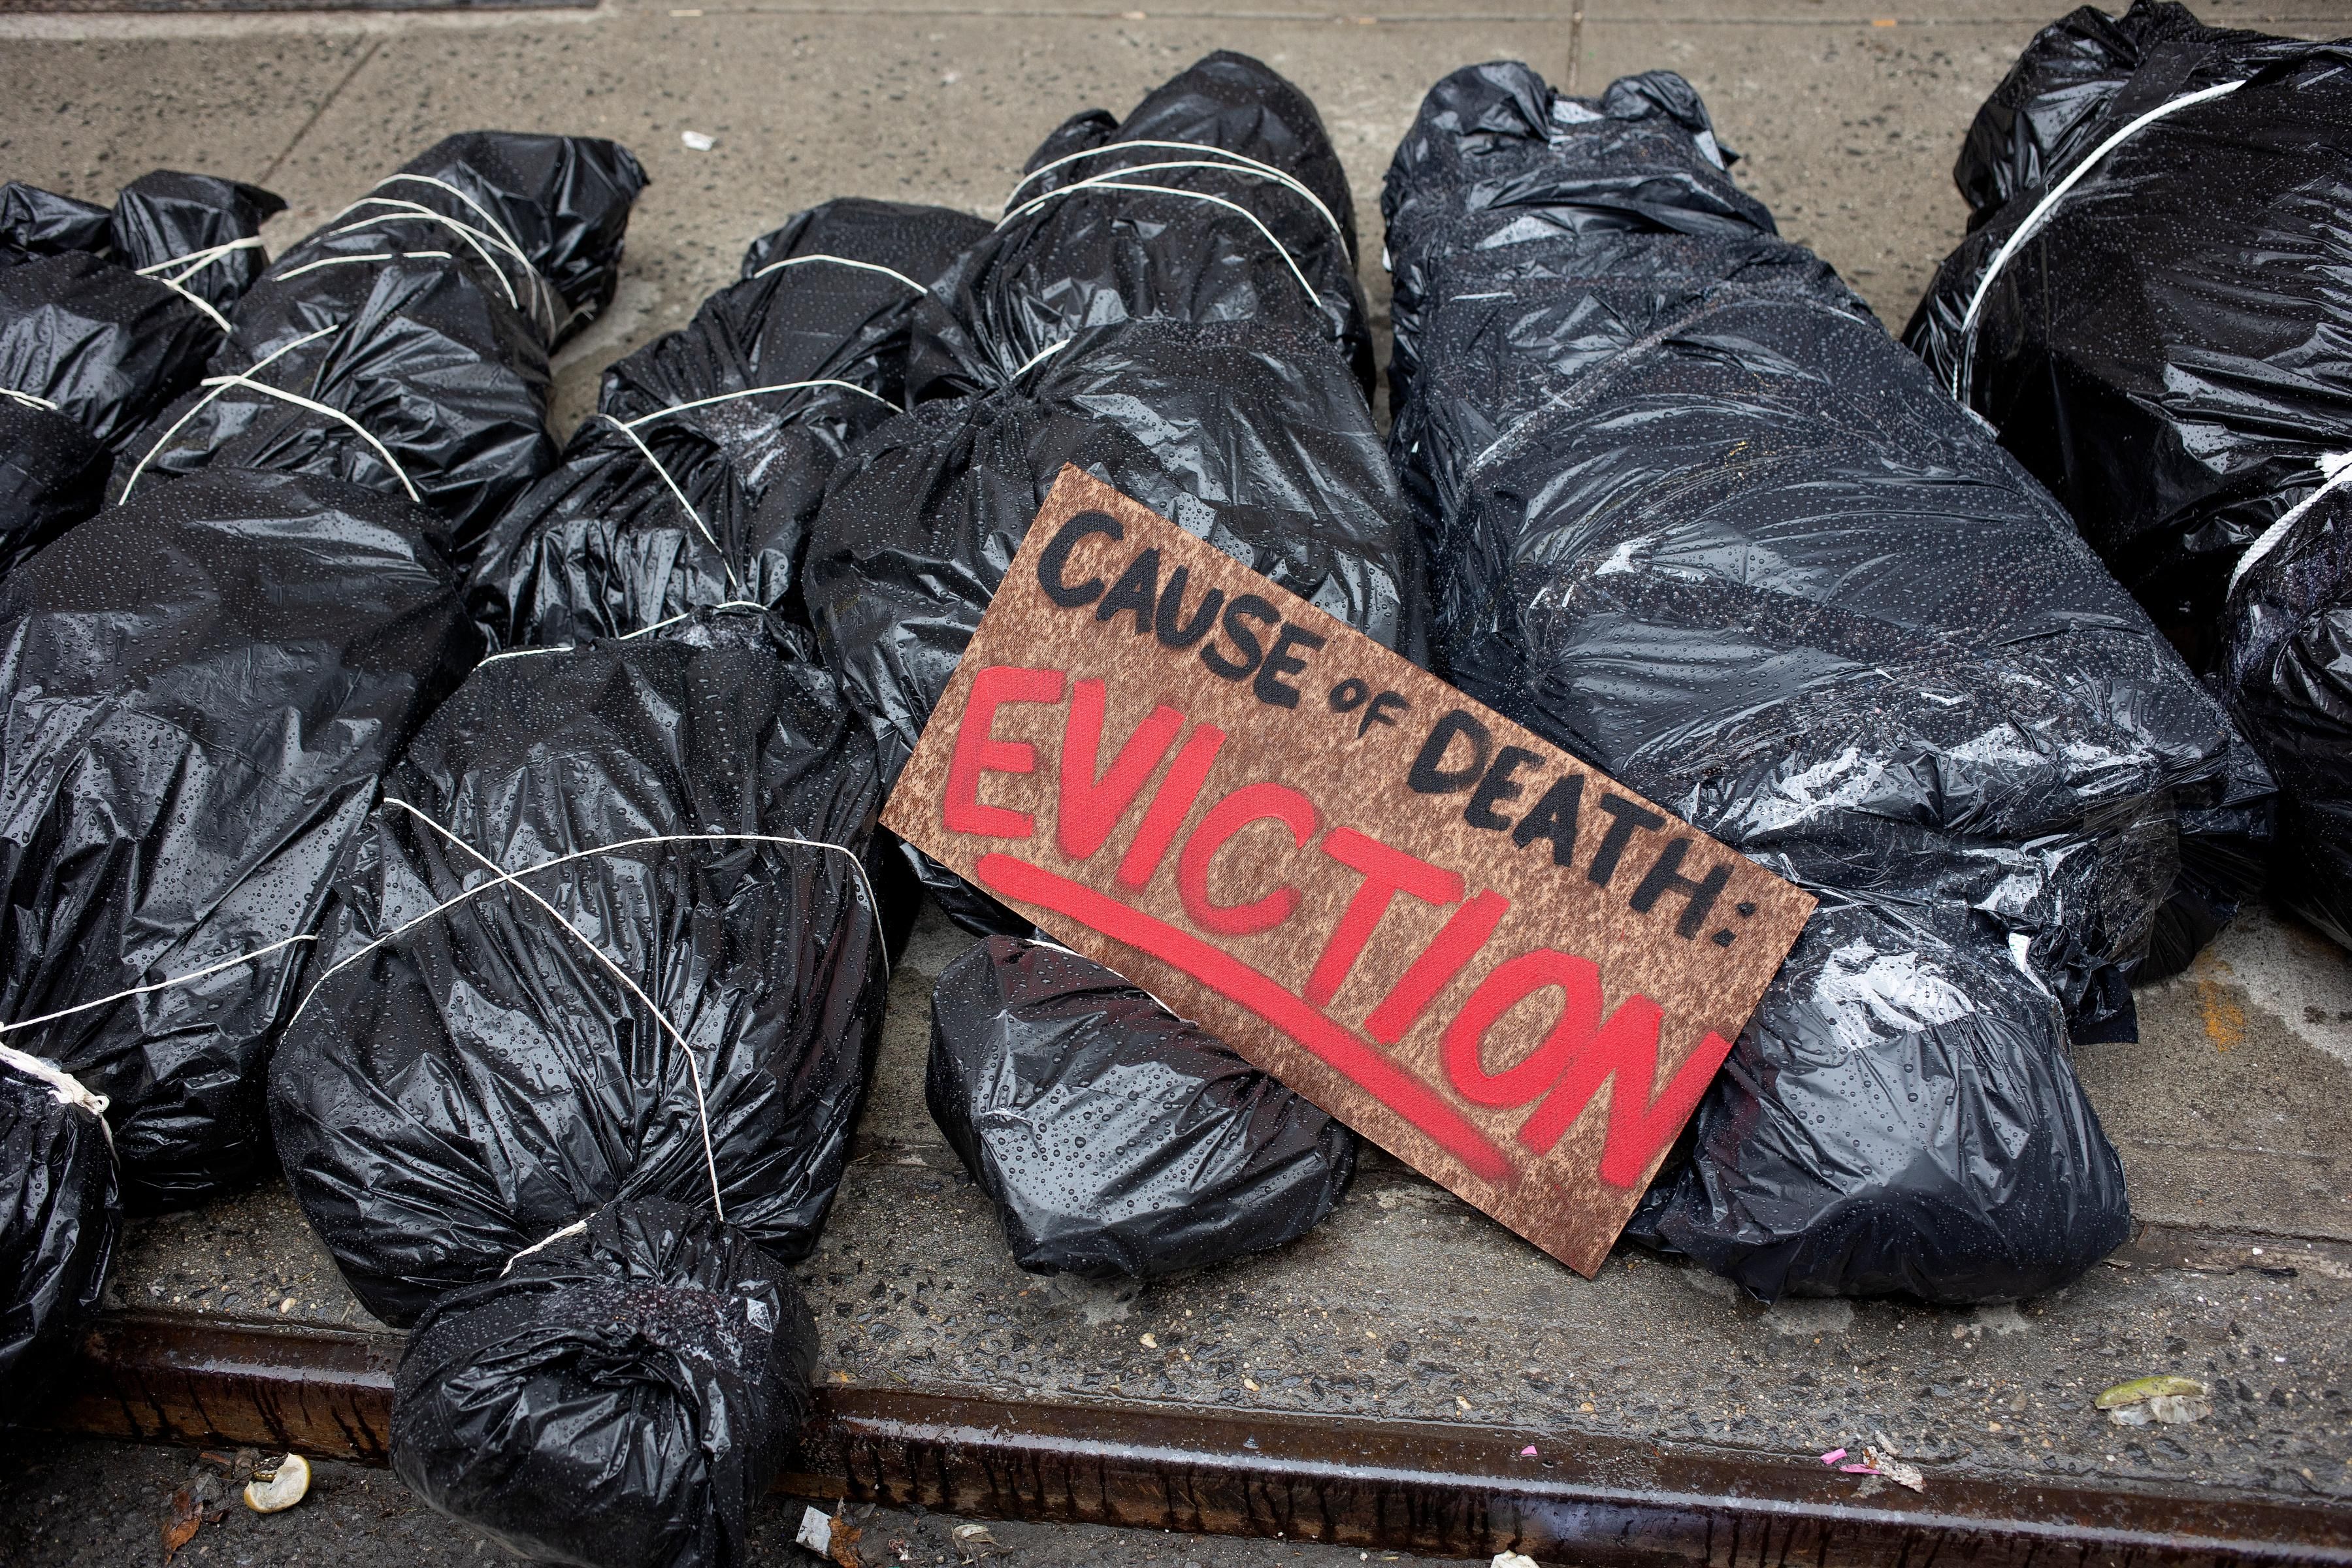 Demonstrators line up mock body bags during a protest